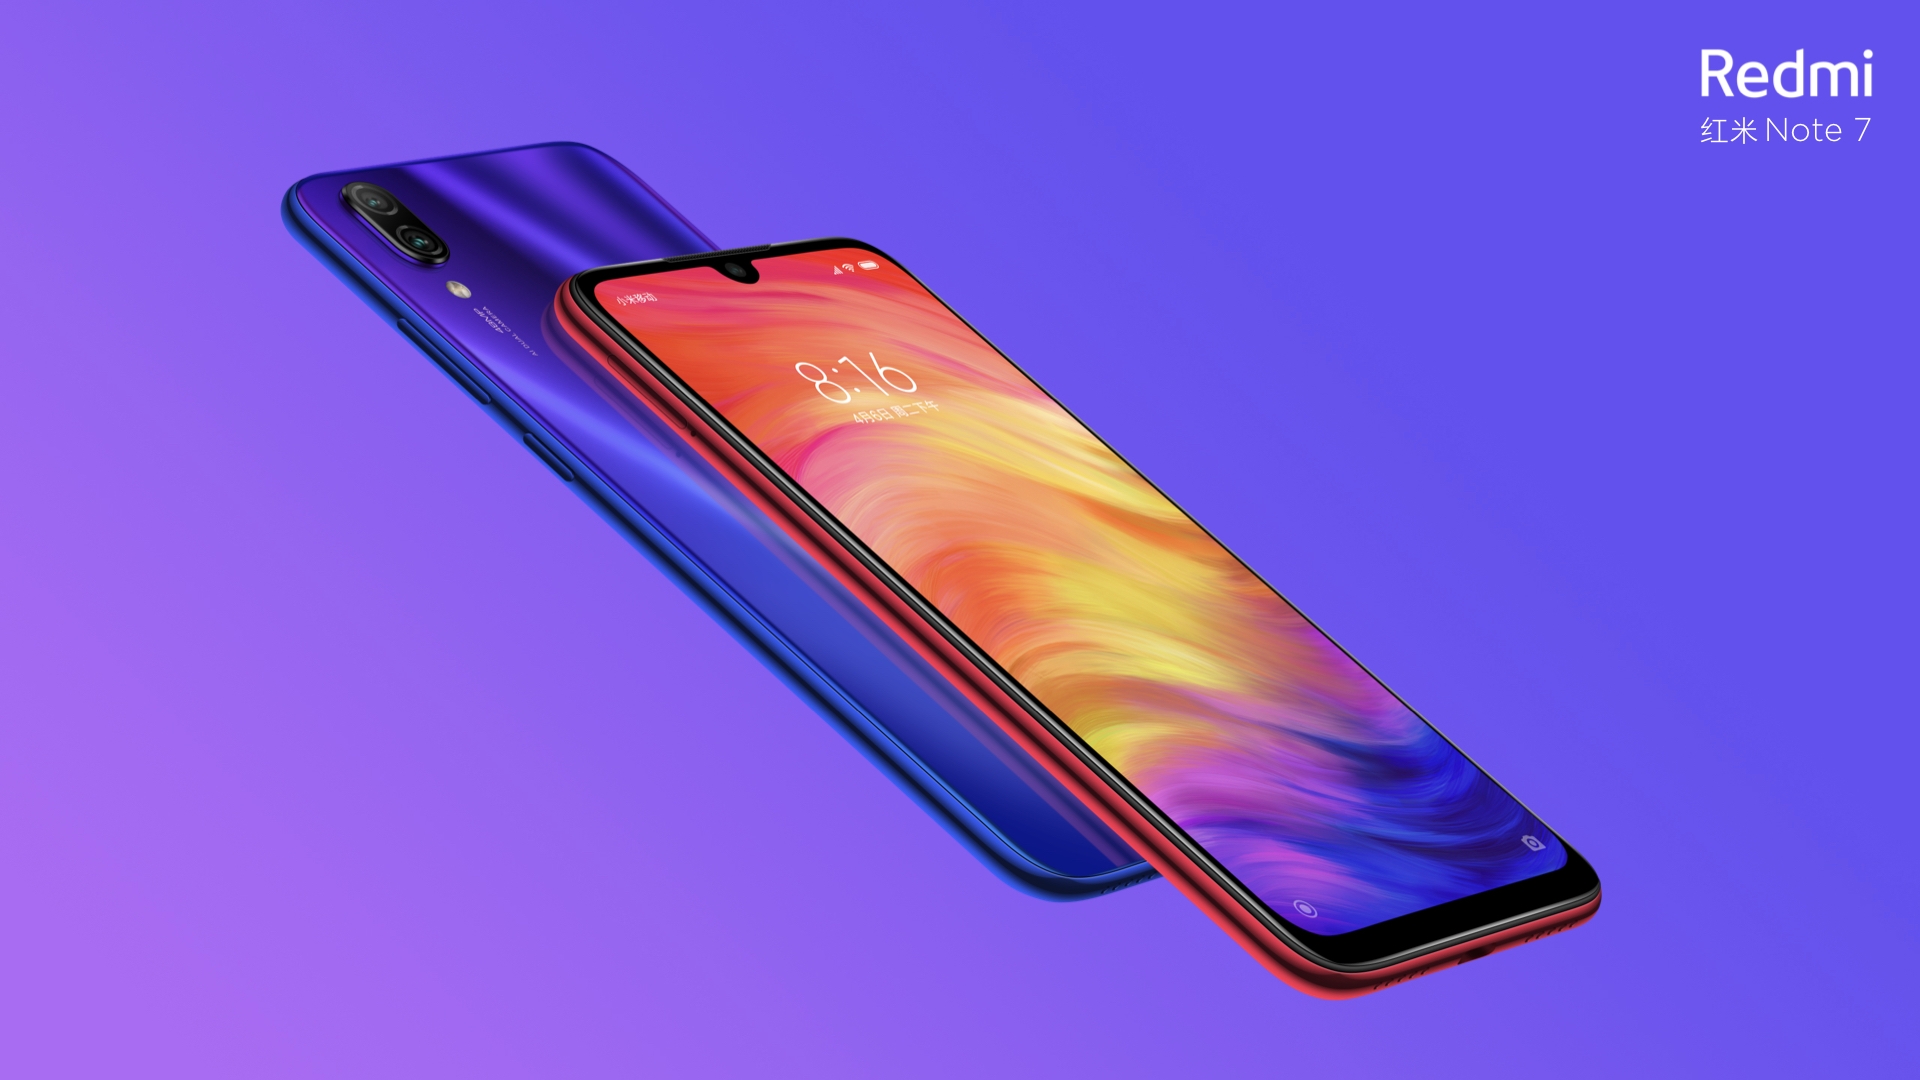 The Redmi Note 7 Pro with 48MP camera will launch in India.